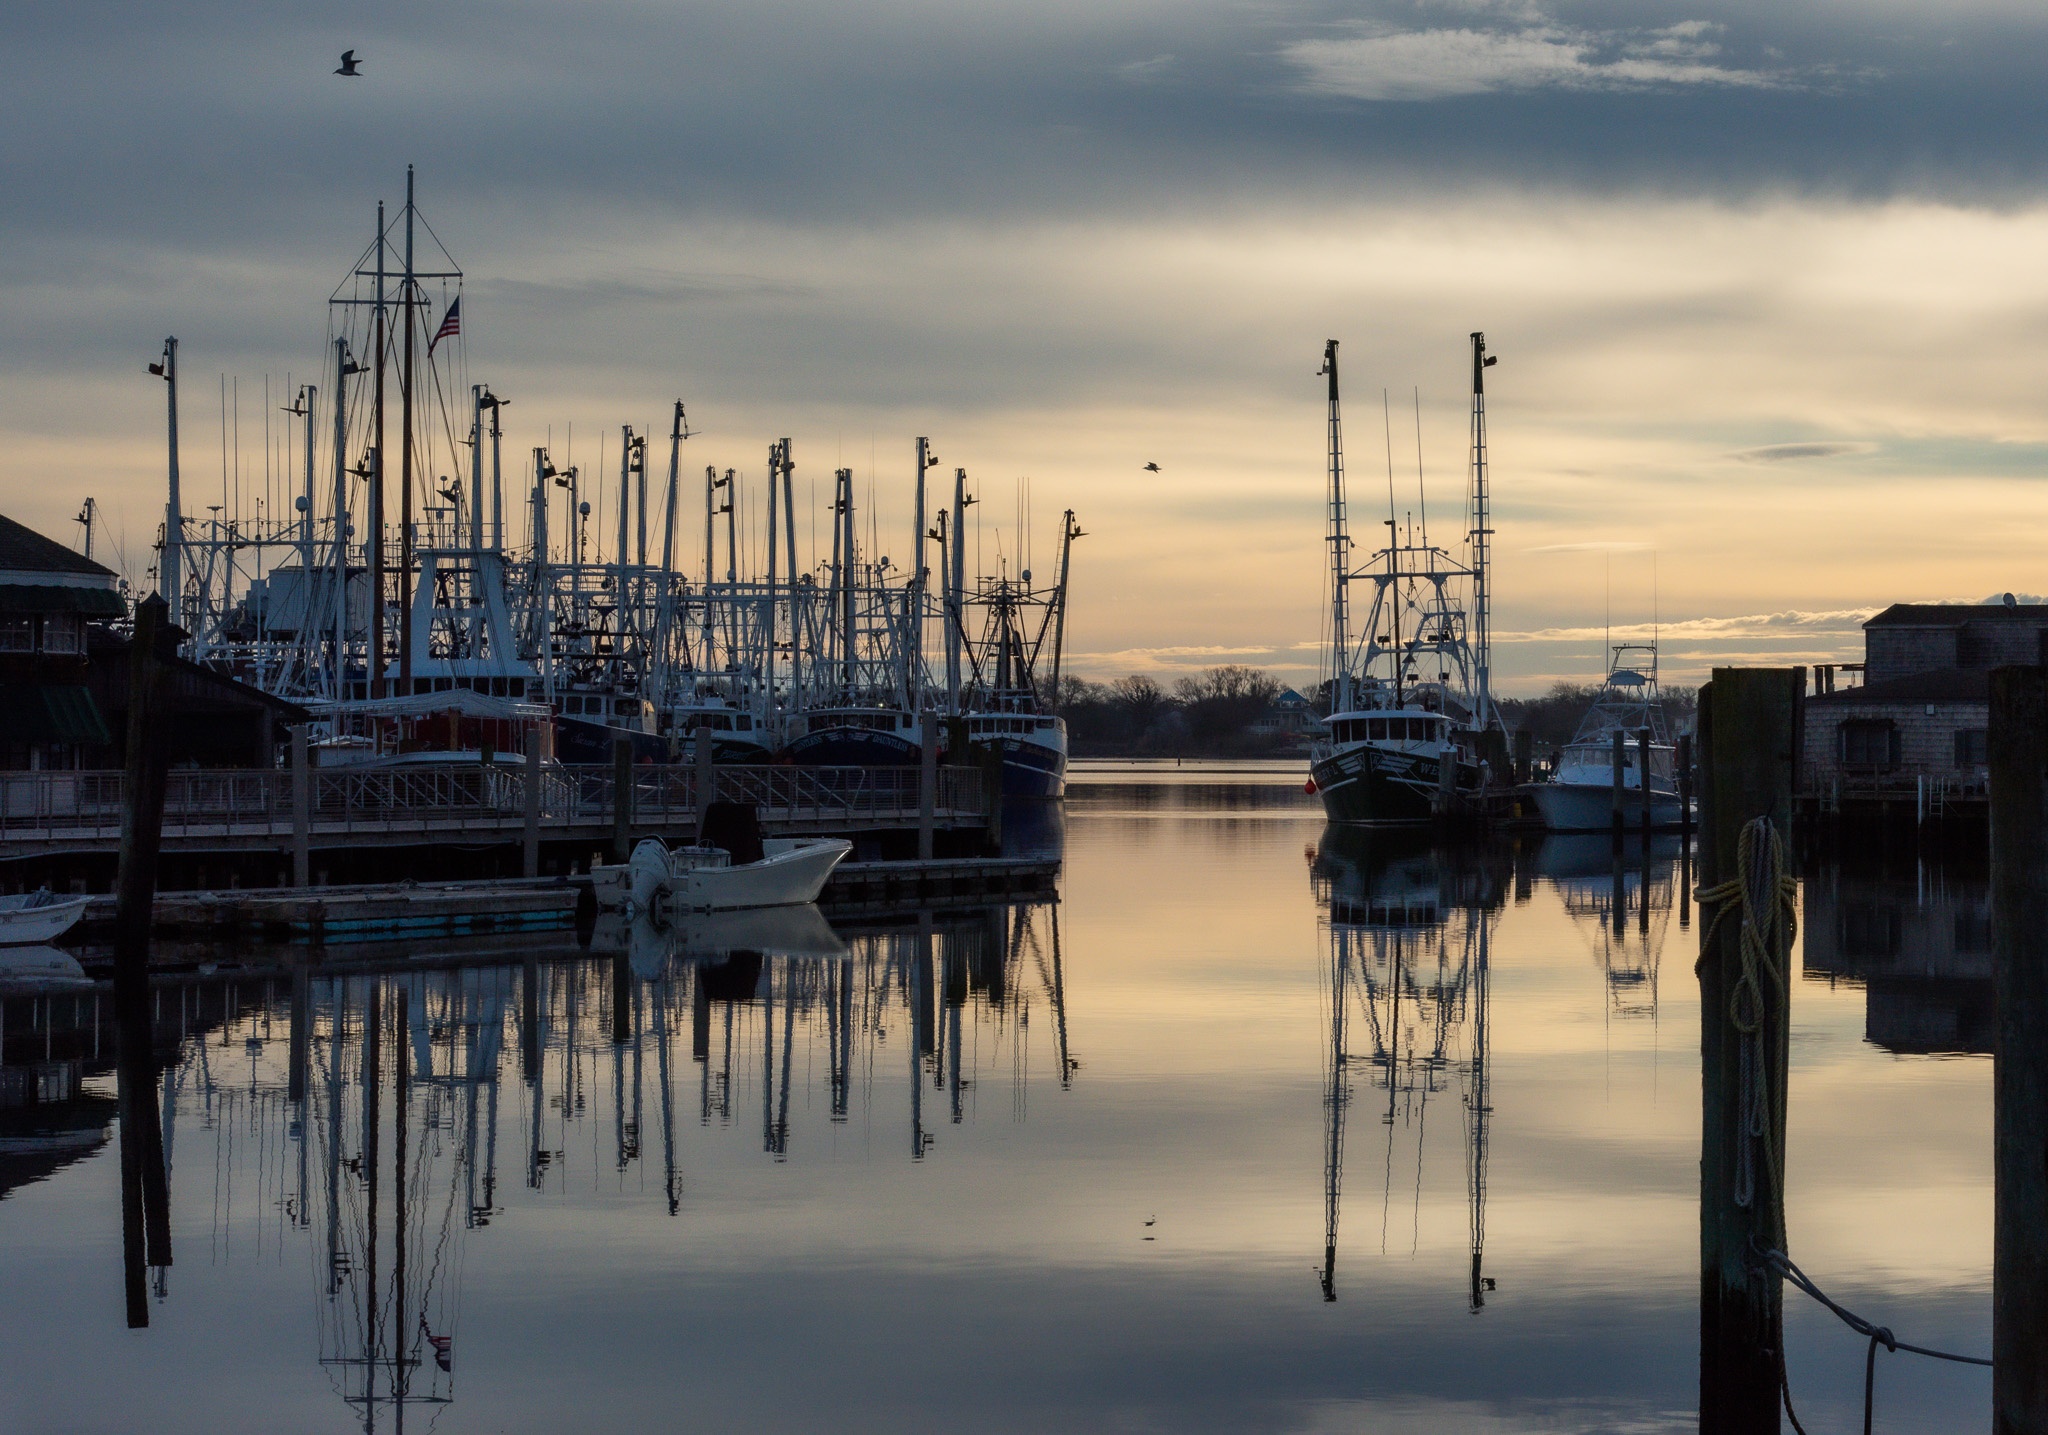 Morning at the Harbor where you can see fishing boats, the docks, and birds